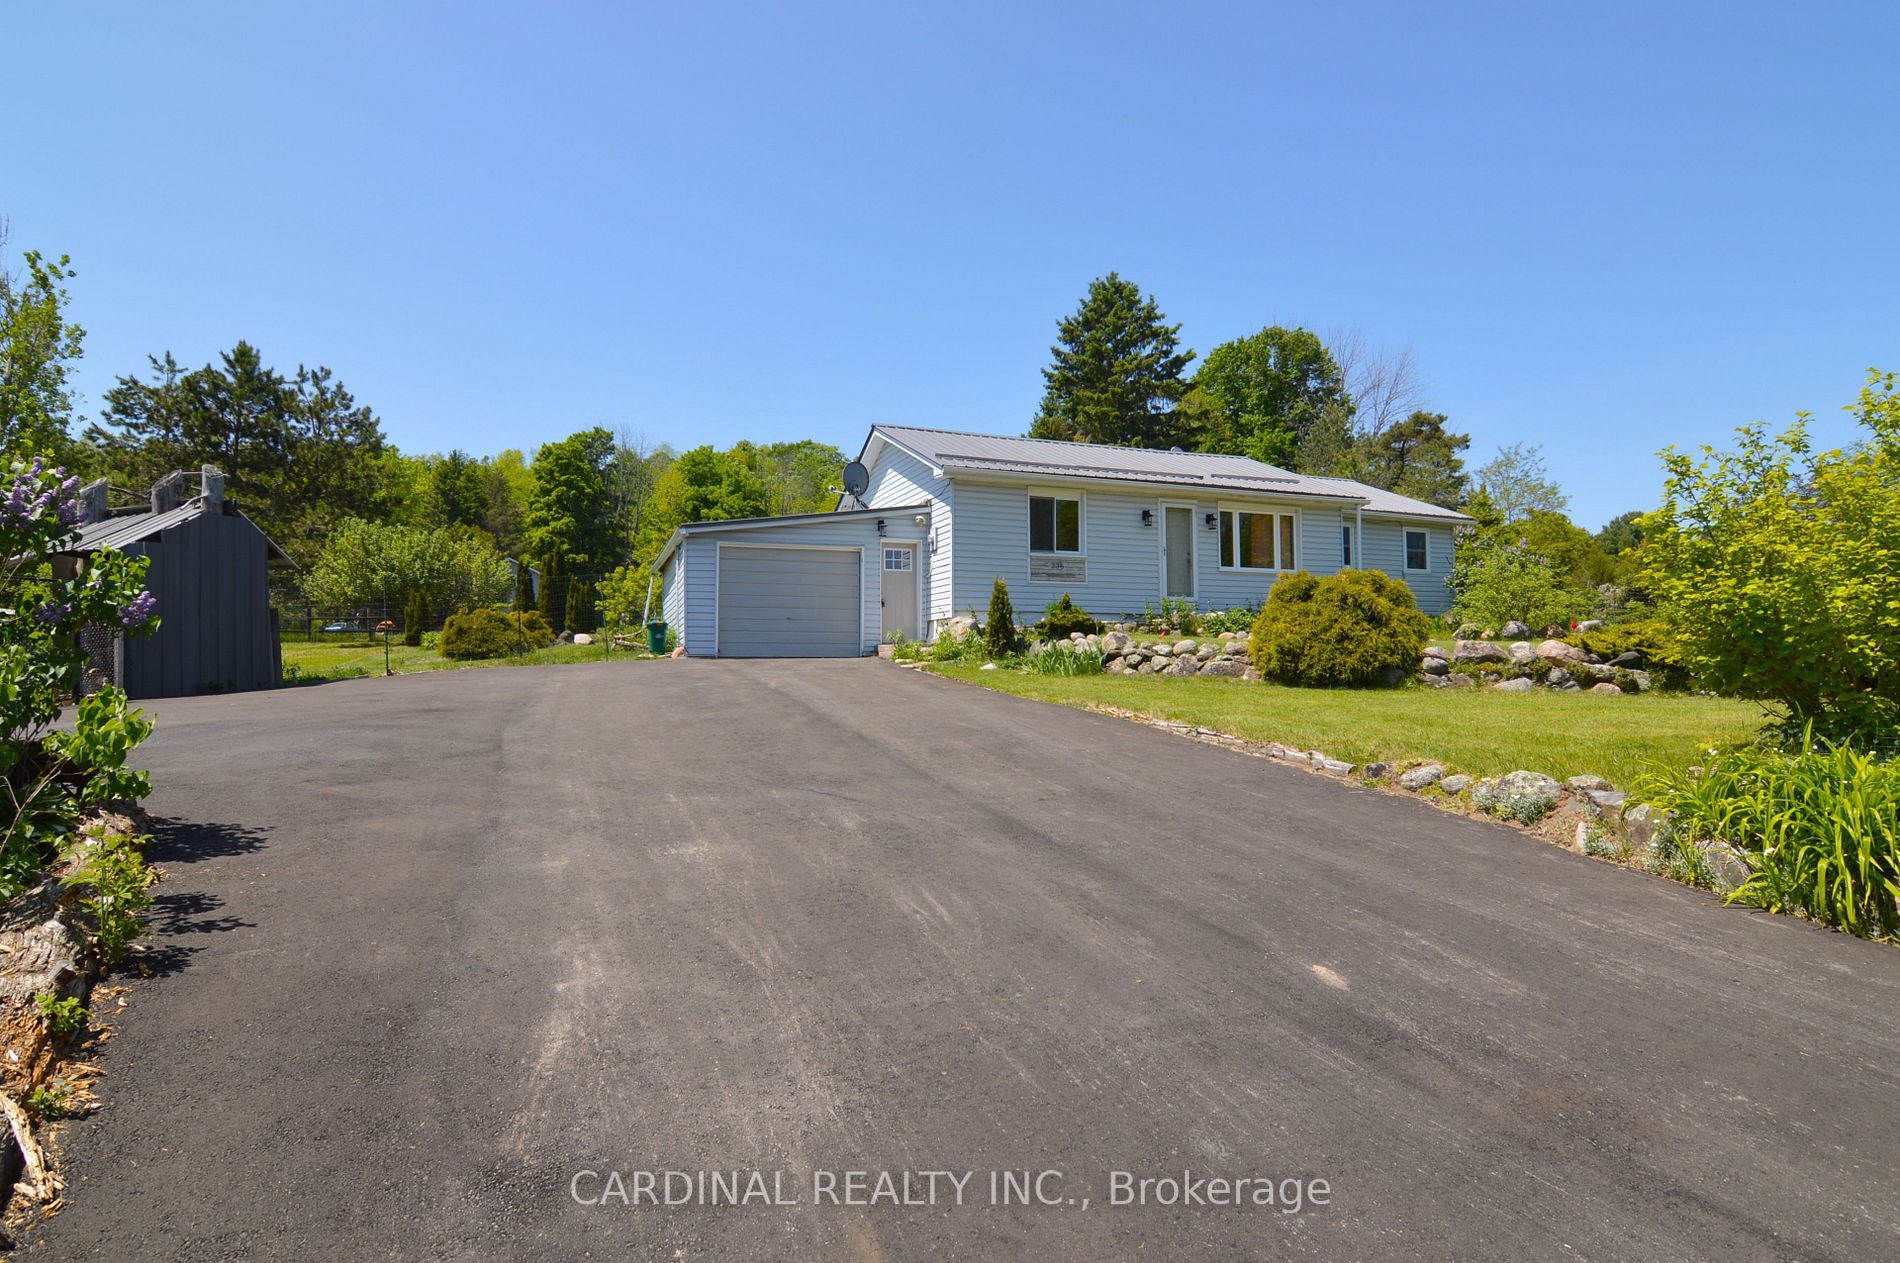 New property listed in Castleton, Cramahe